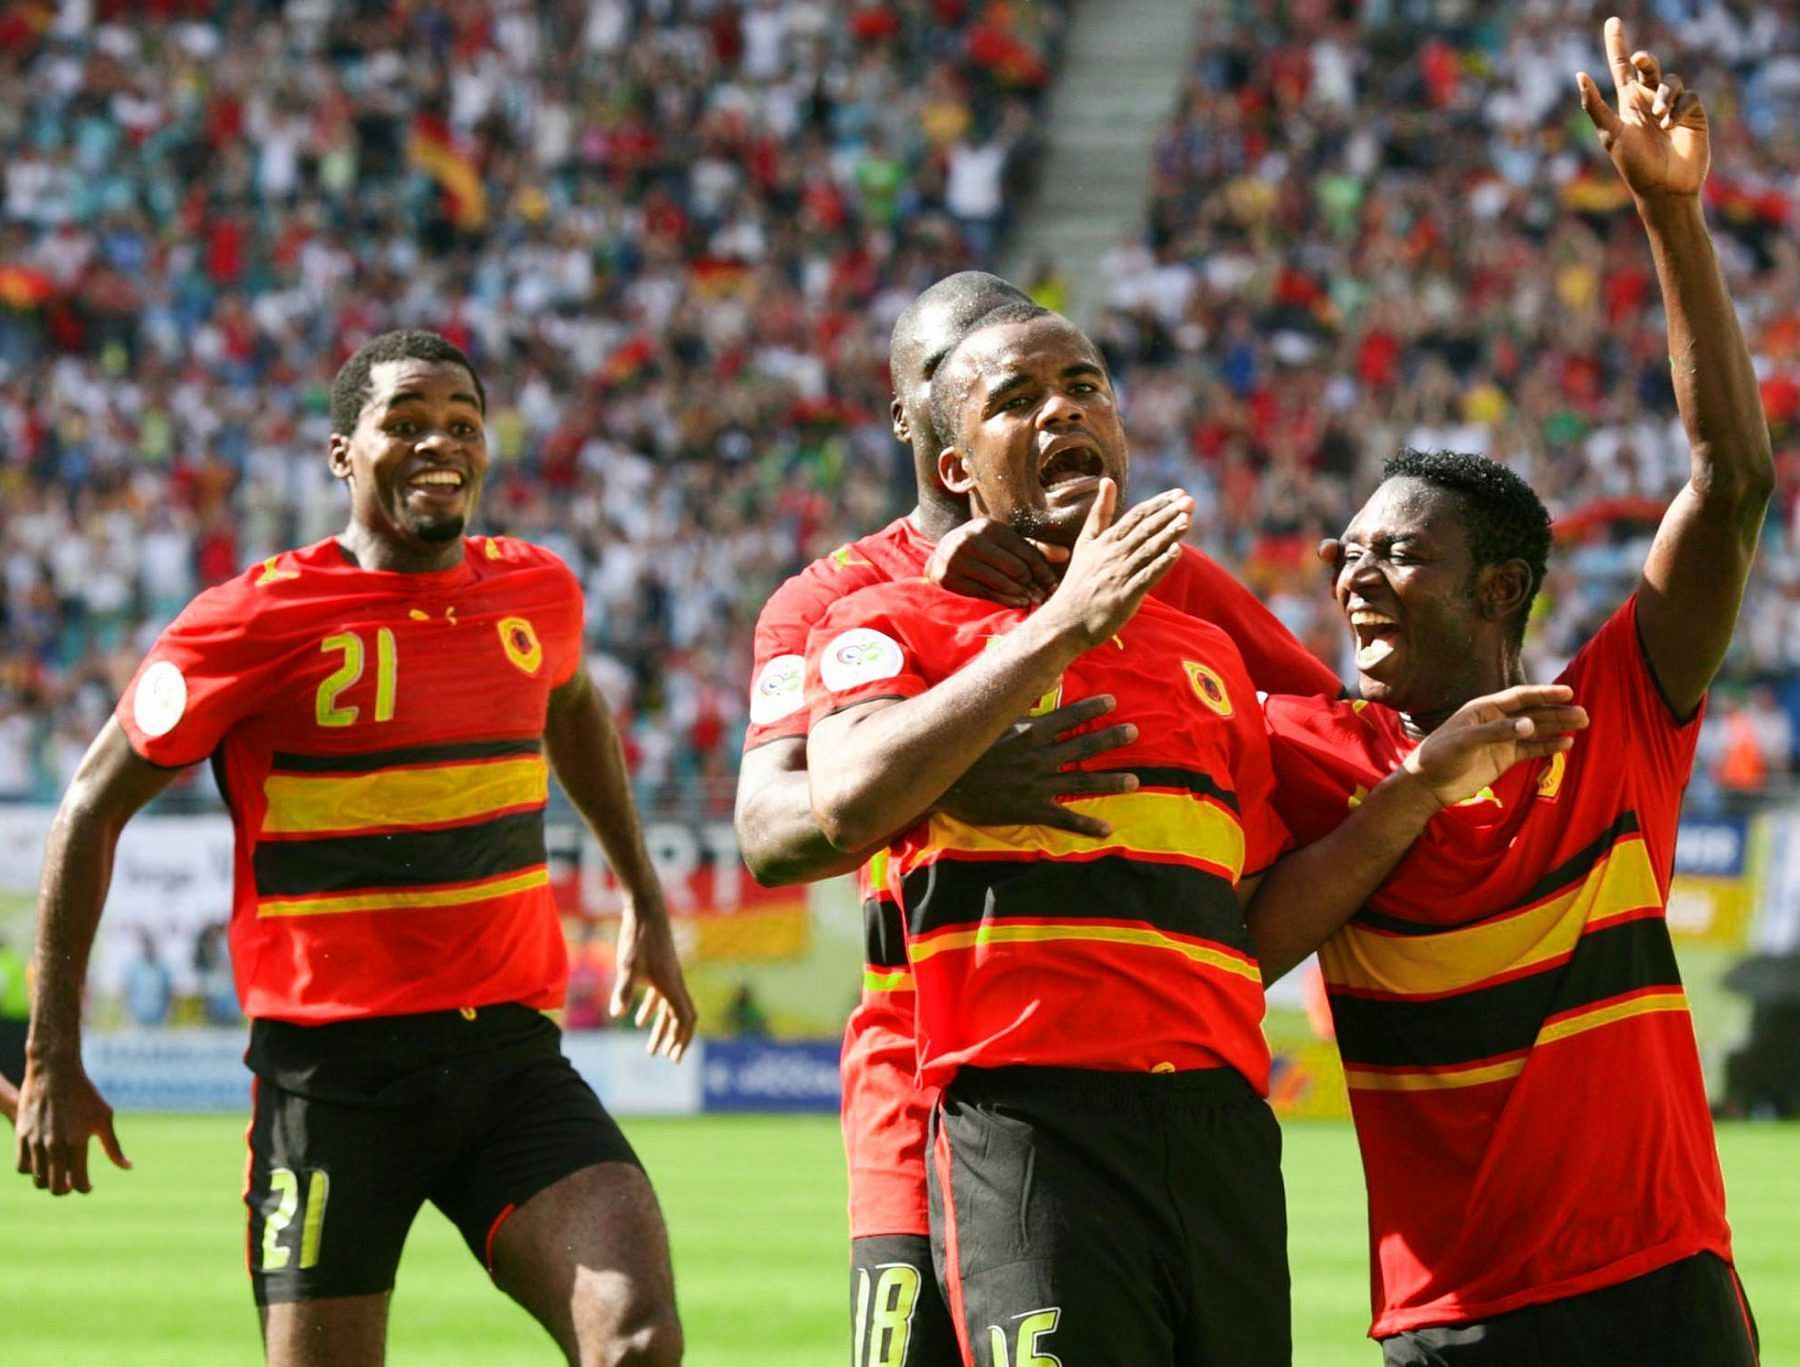 Angola and the Central African Republic square off in their AFCON qualifying fixture on Wednesday